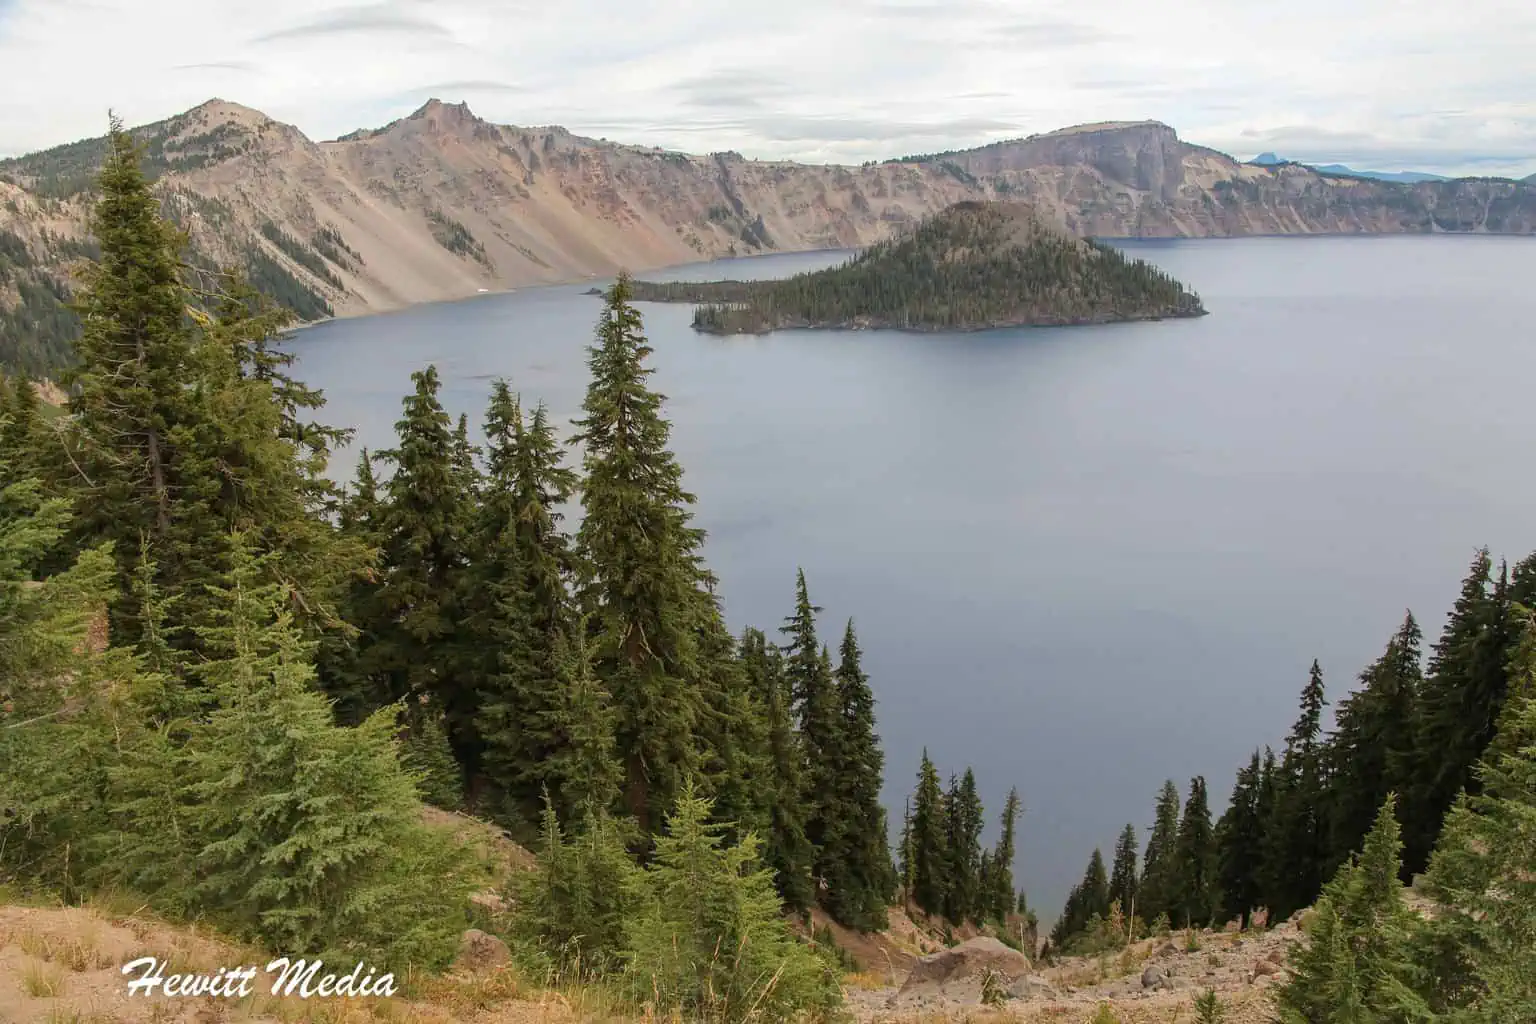 Best Hikes in the National Parks - The Rim Trail in Crater Lake